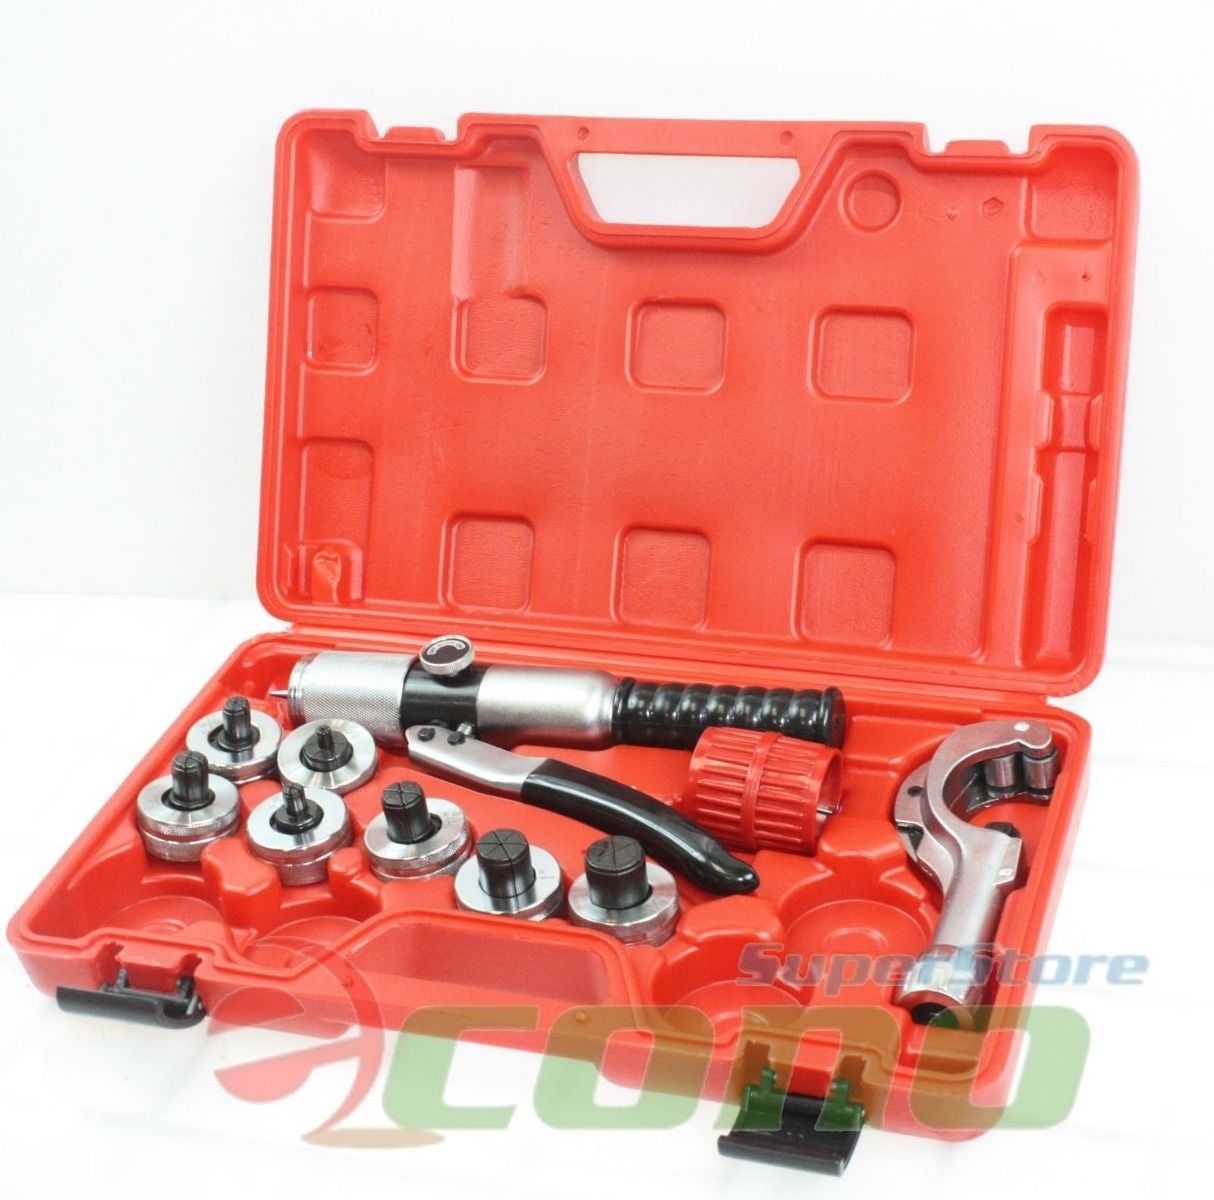 Hydraulic Tube Expander Swaging 7 Lever Tube Tubing Expanding Tube Cutter Tool 